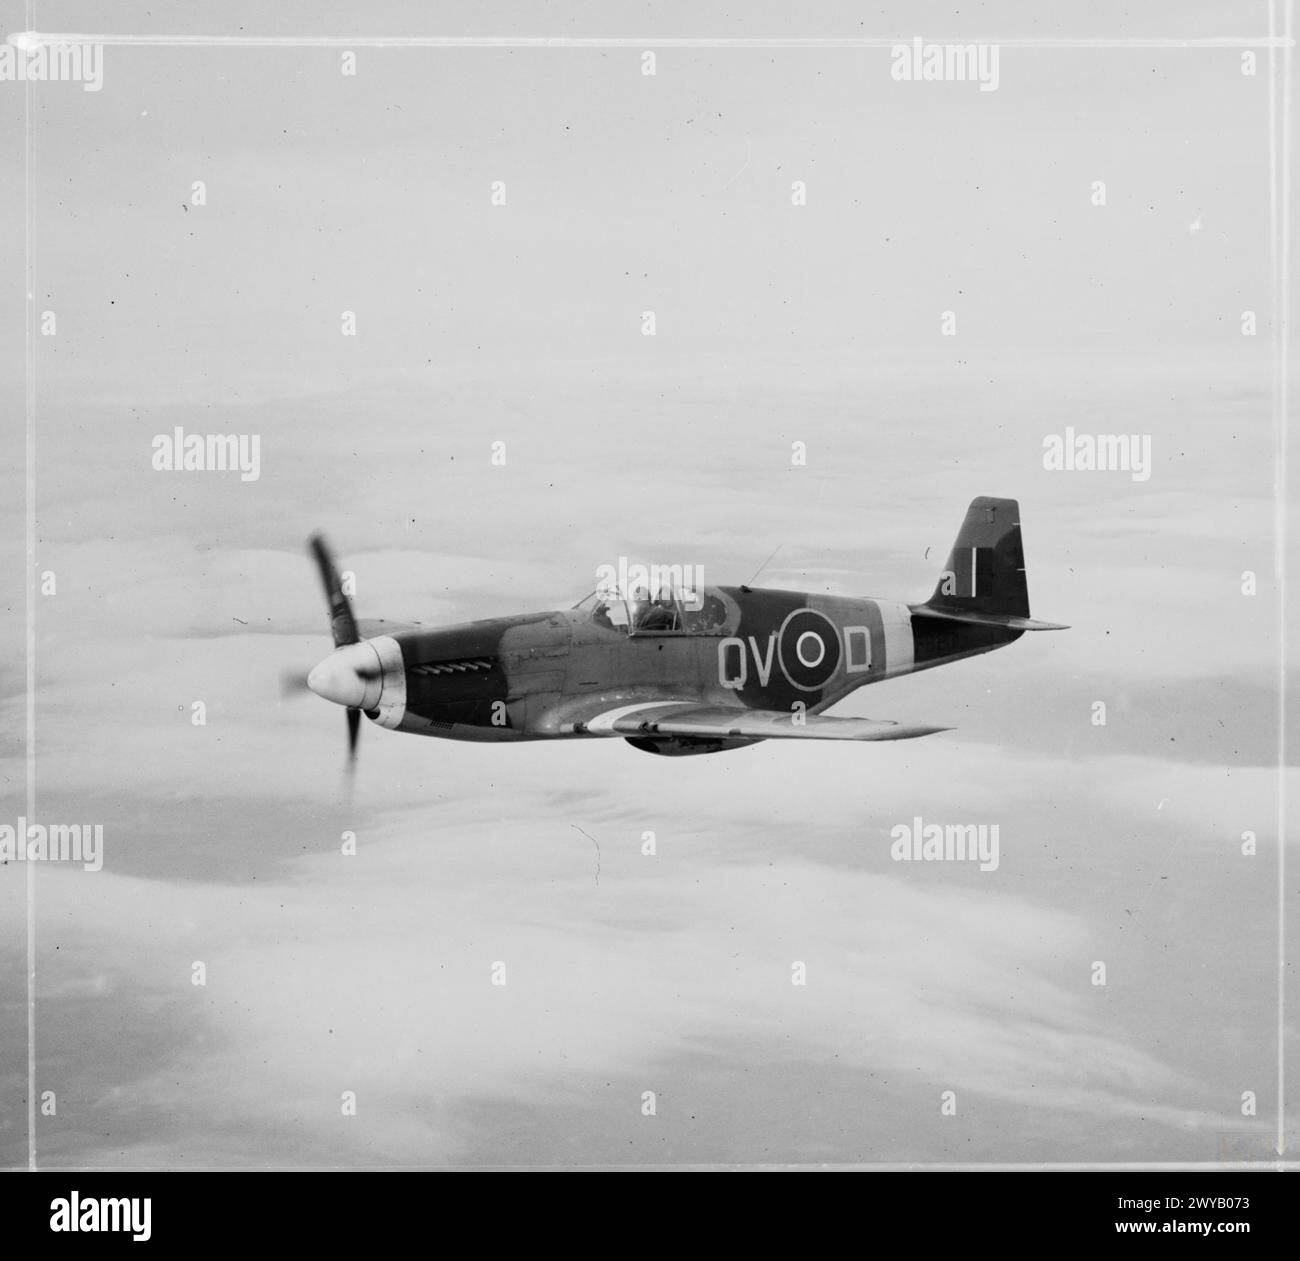 ROYAL AIR FORCE 1939-1945: FIGHTER COMMAND - Mustang III of No 19 Squadron, based at Ford, in flight, 21 April 1944. It wears the standard Mustang recognition markings of white spinner, nose and wing bands. Production of the Allison-engined Mustang I and II was halted in mid-1943 to make way for the Merlin-powered Mk III. The new Mustang was designed for the air-superiority role, and finally gave both the USAAF and RAF a single-seat fighter that combined excellent high-altitude performance with an outstanding range (combat radius was 750 miles with drop-tanks). , Royal Air Force, 19 Squadron Stock Photo